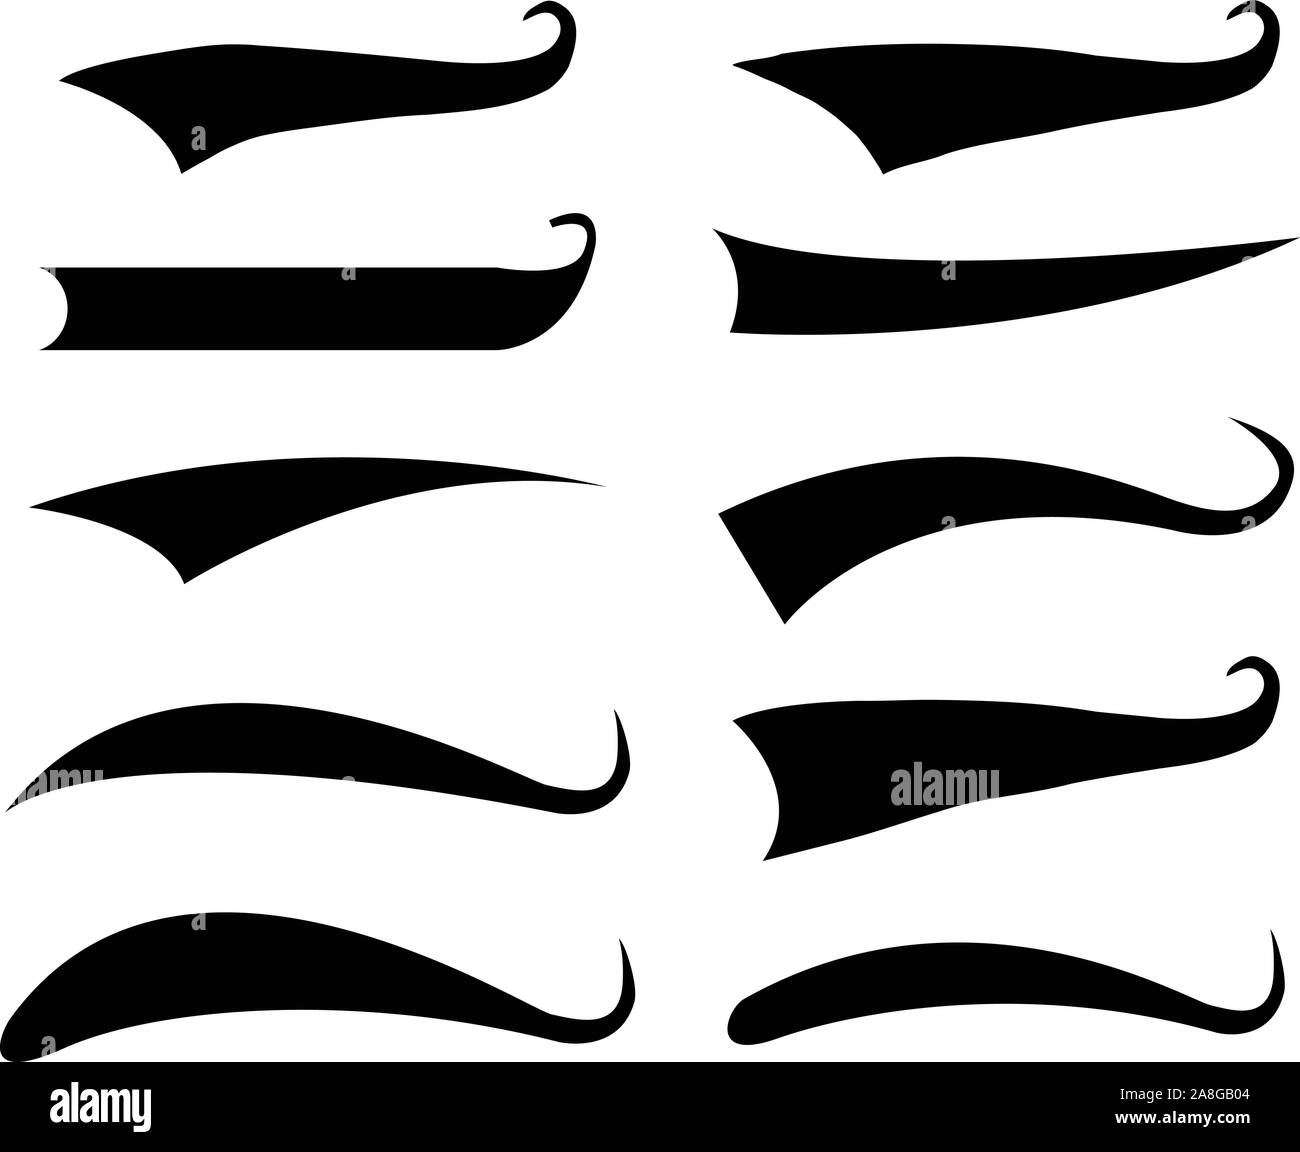 Font Swoosh Tails Ornamental Vector Graphic by nurearth · Creative Fabrica